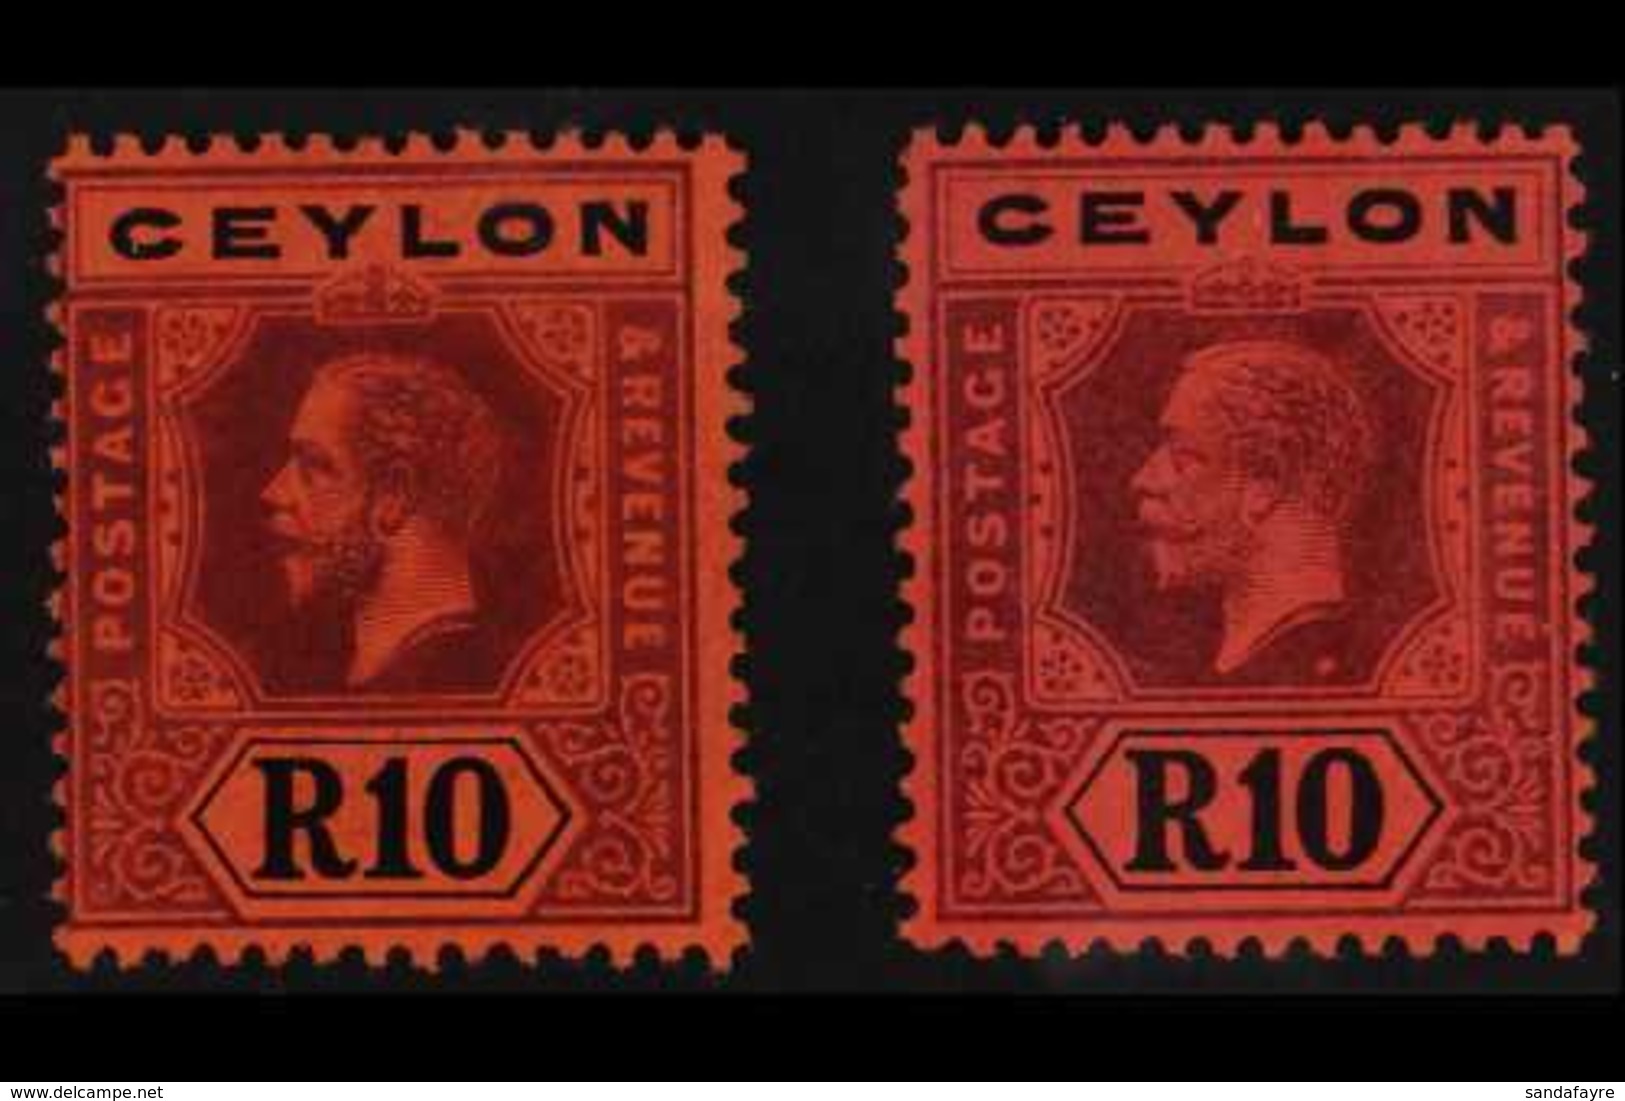 1912 - 25 10r Purple And Black On Red, Die I And Die II, SG 318, 318b, Very Fine Mint. (2 Stamps) For More Images, Pleas - Ceylon (...-1947)